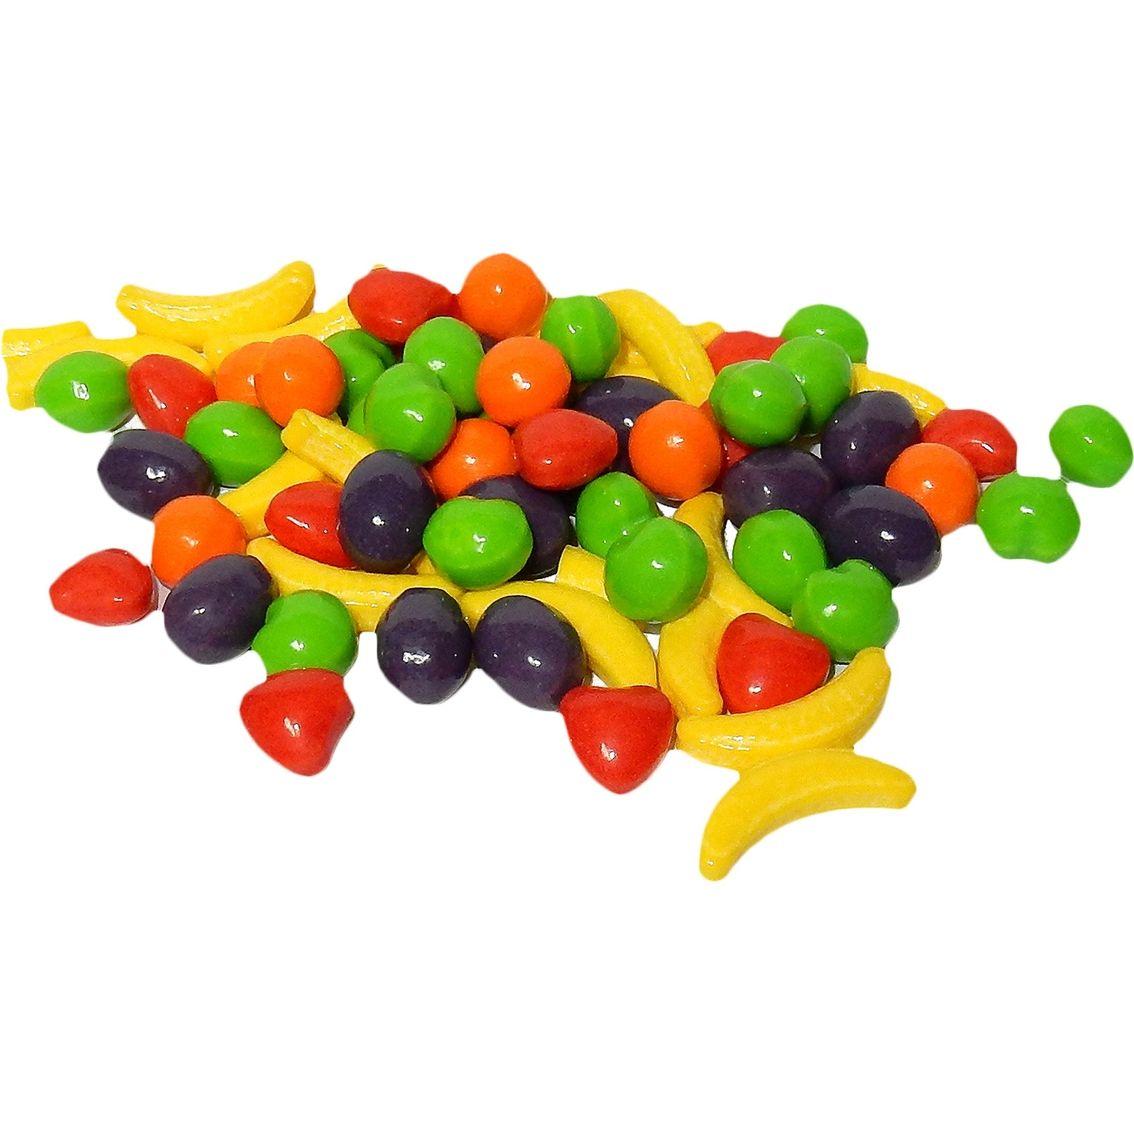 Runts Logo - Runts Candy 6 Lb. Bag | Candy & Chocolate | Gifts & Food | Shop The ...